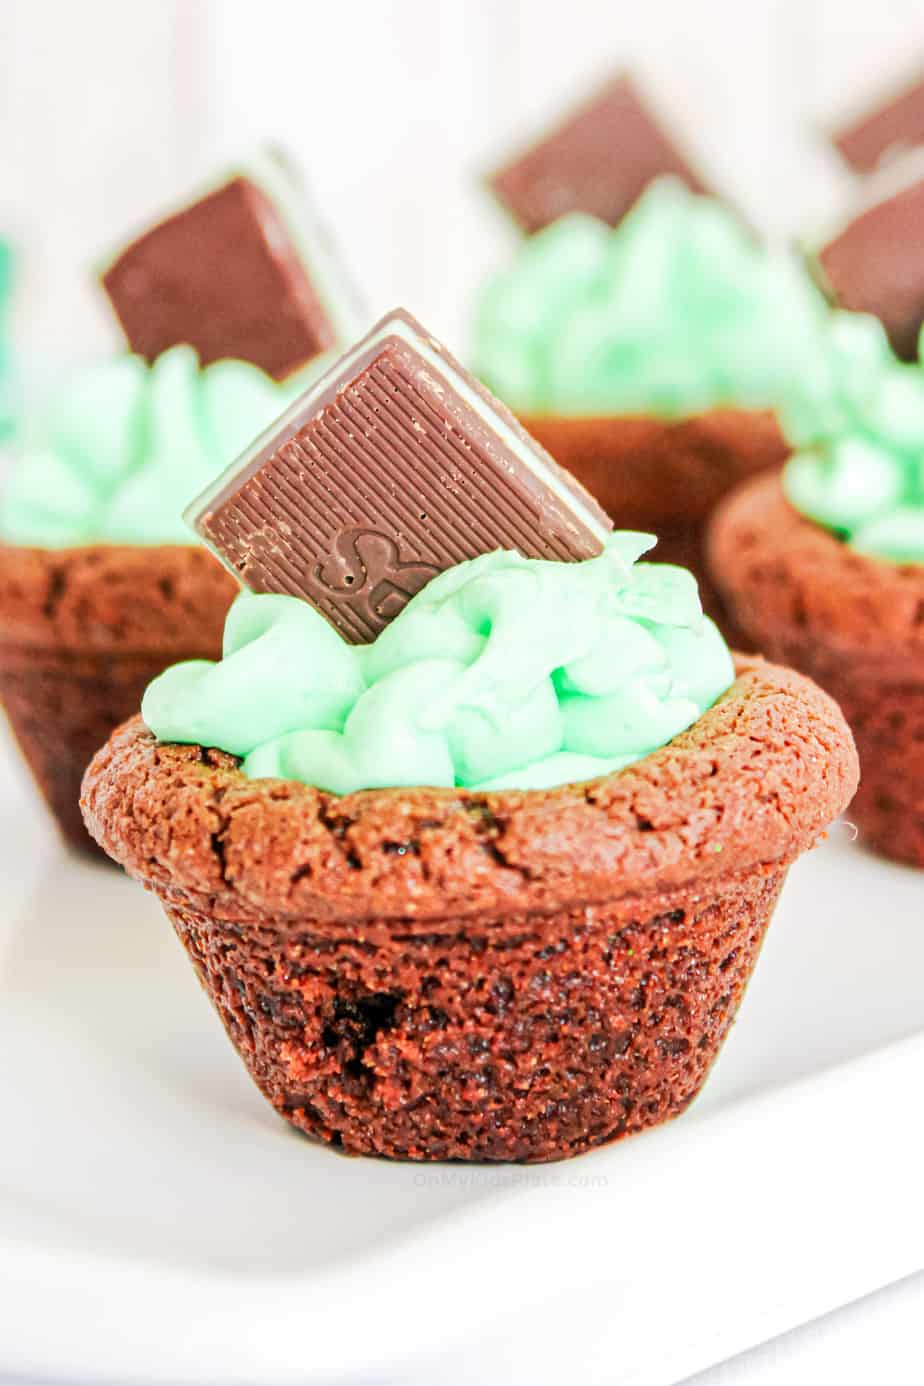 Chocolate cookie cup up close filled with mint frosting topped with a chocolate Andes Mint.